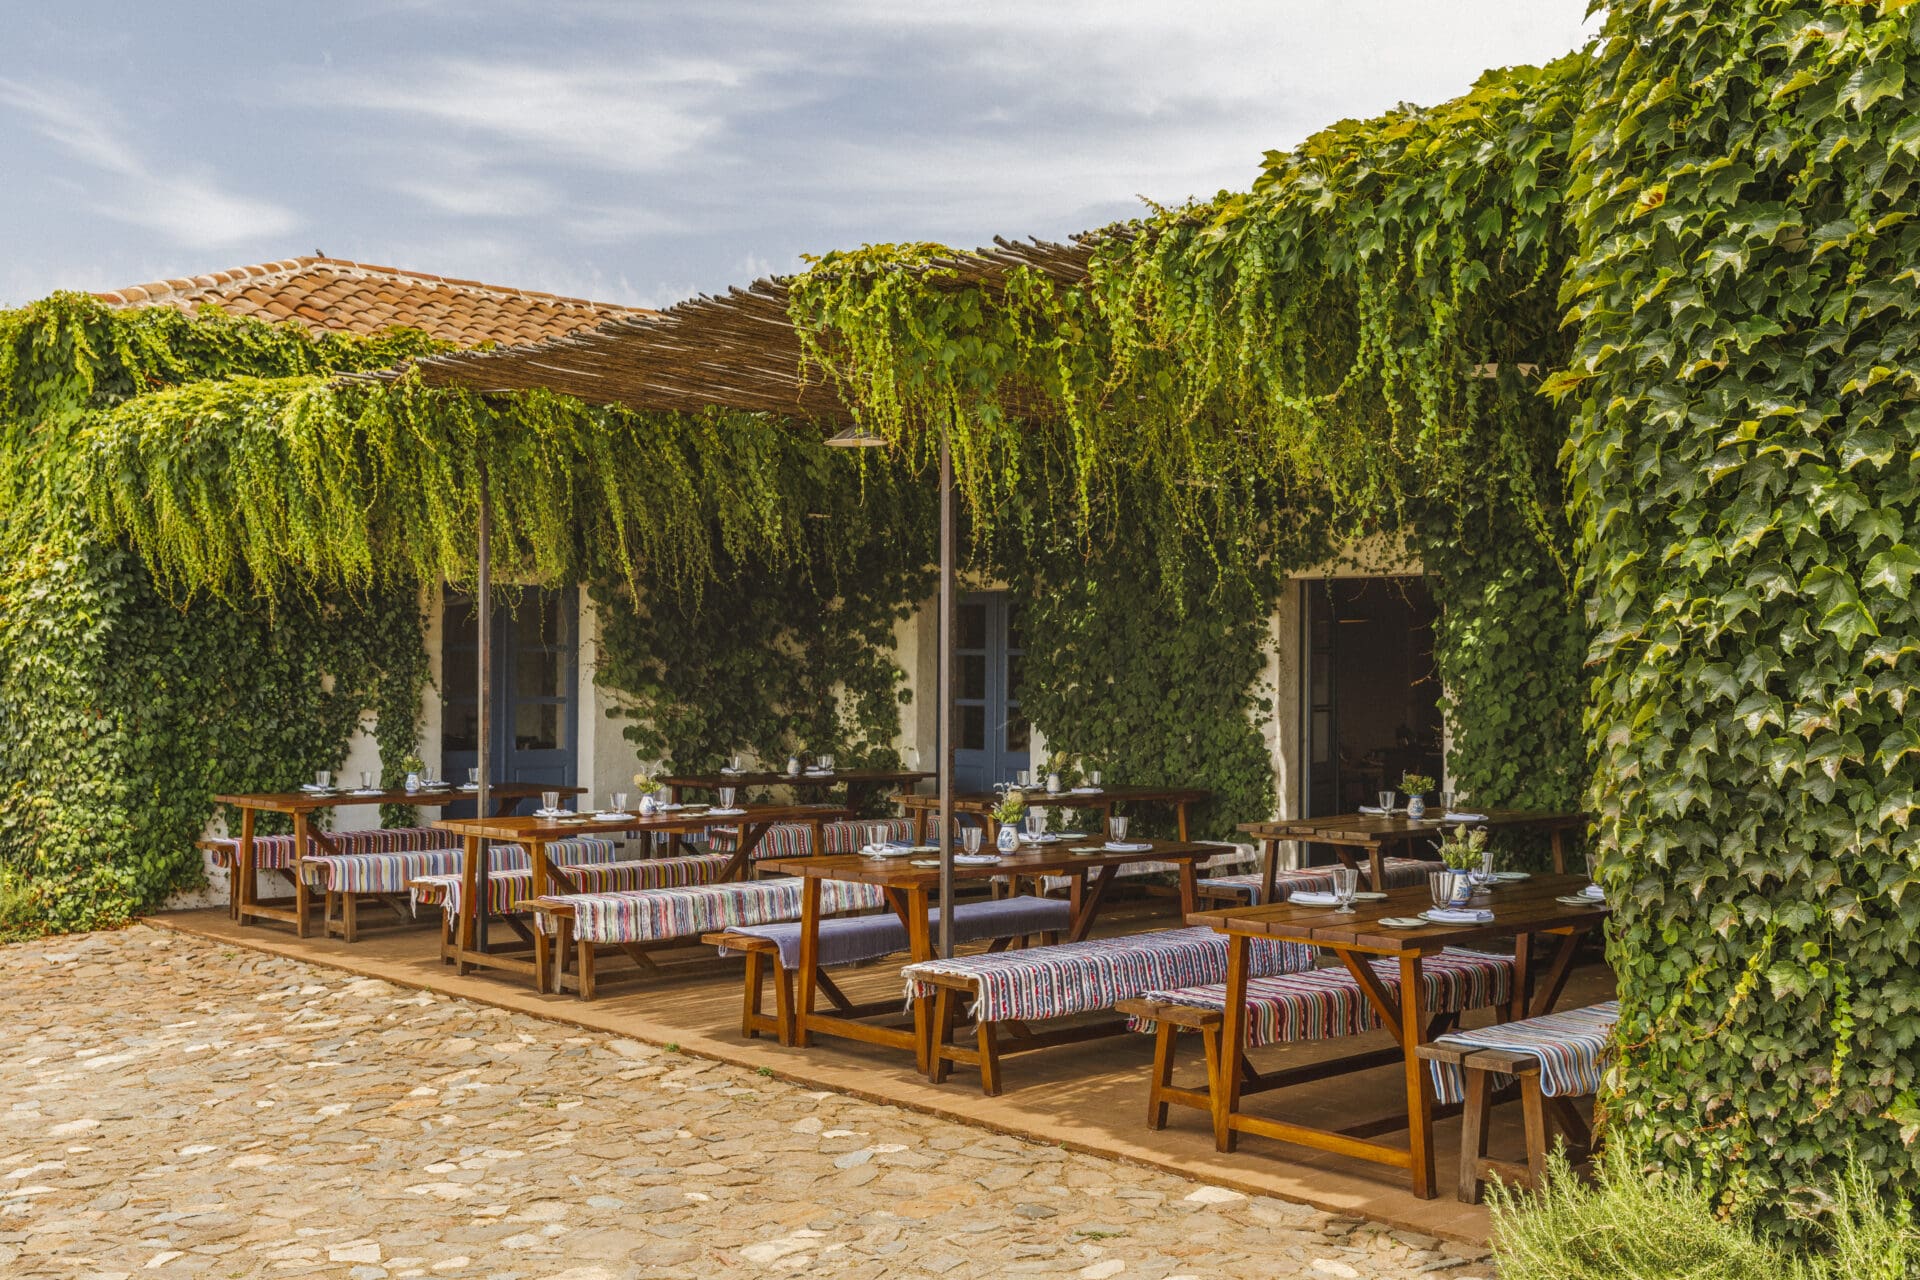 São Lourenço do Barrocal | Wooden benches with blue and white blankets sit on a patio festooned with greenery